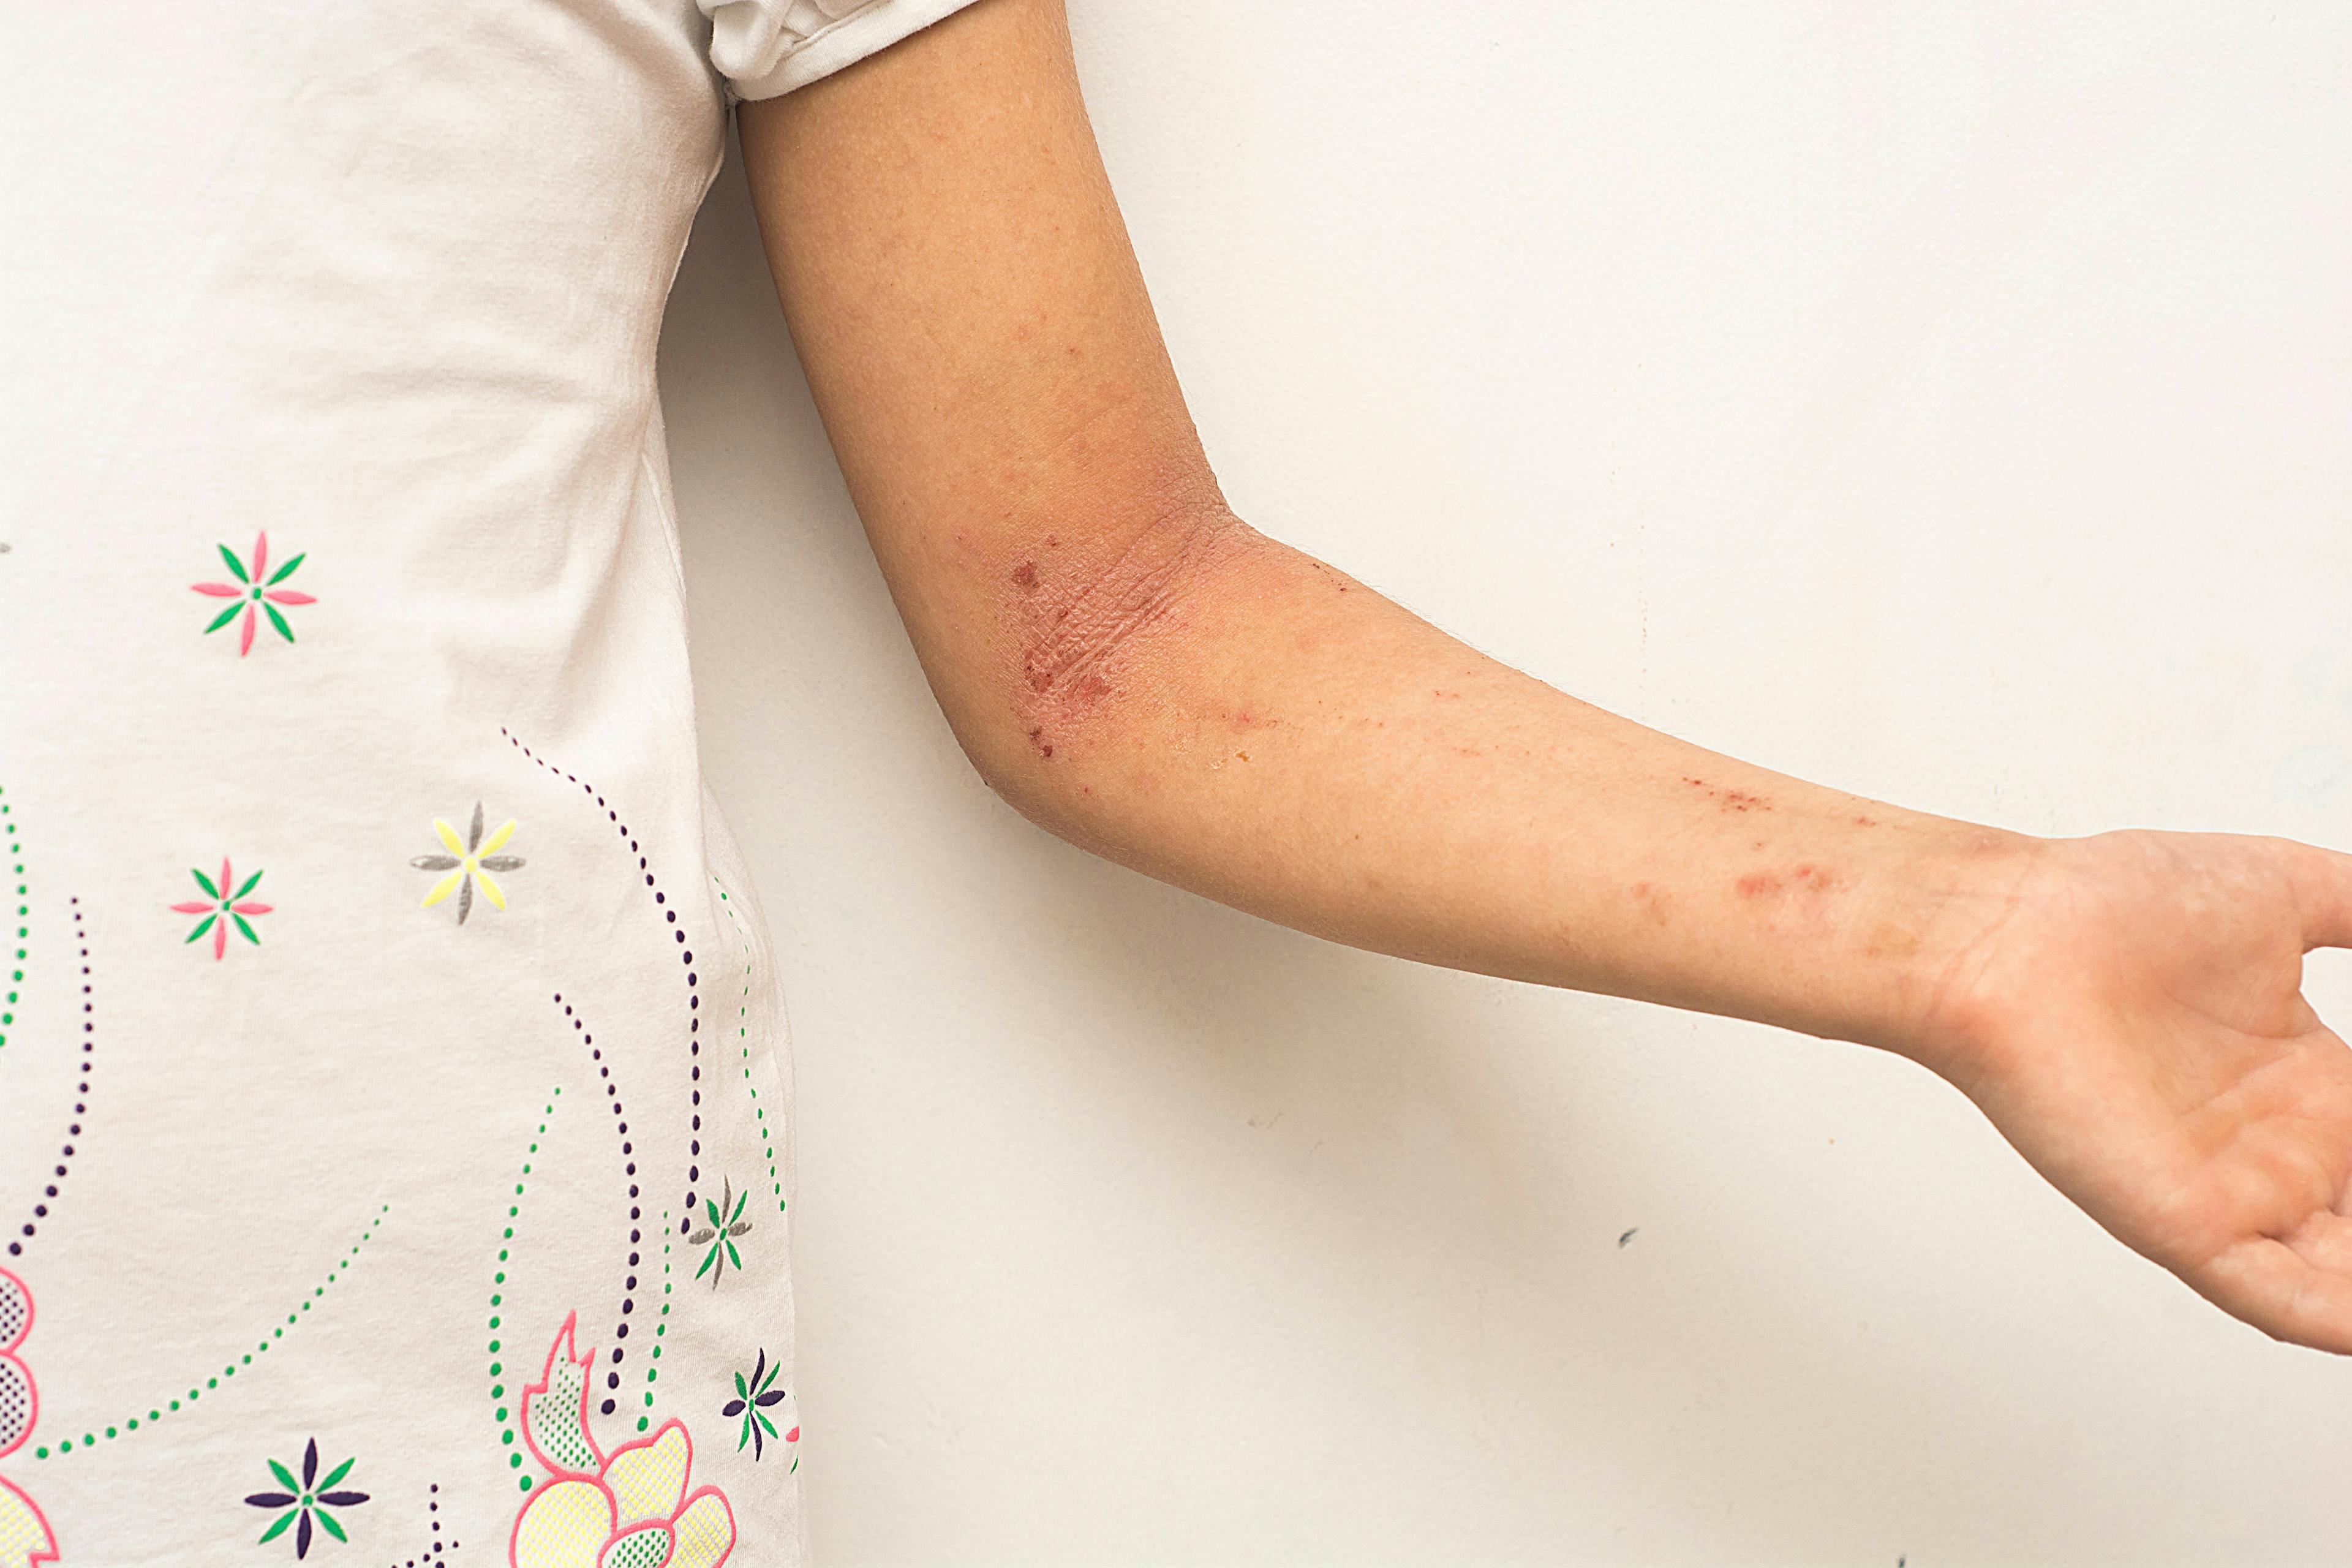 FDA Approves Zoryve for Children with Plaque Psoriasis